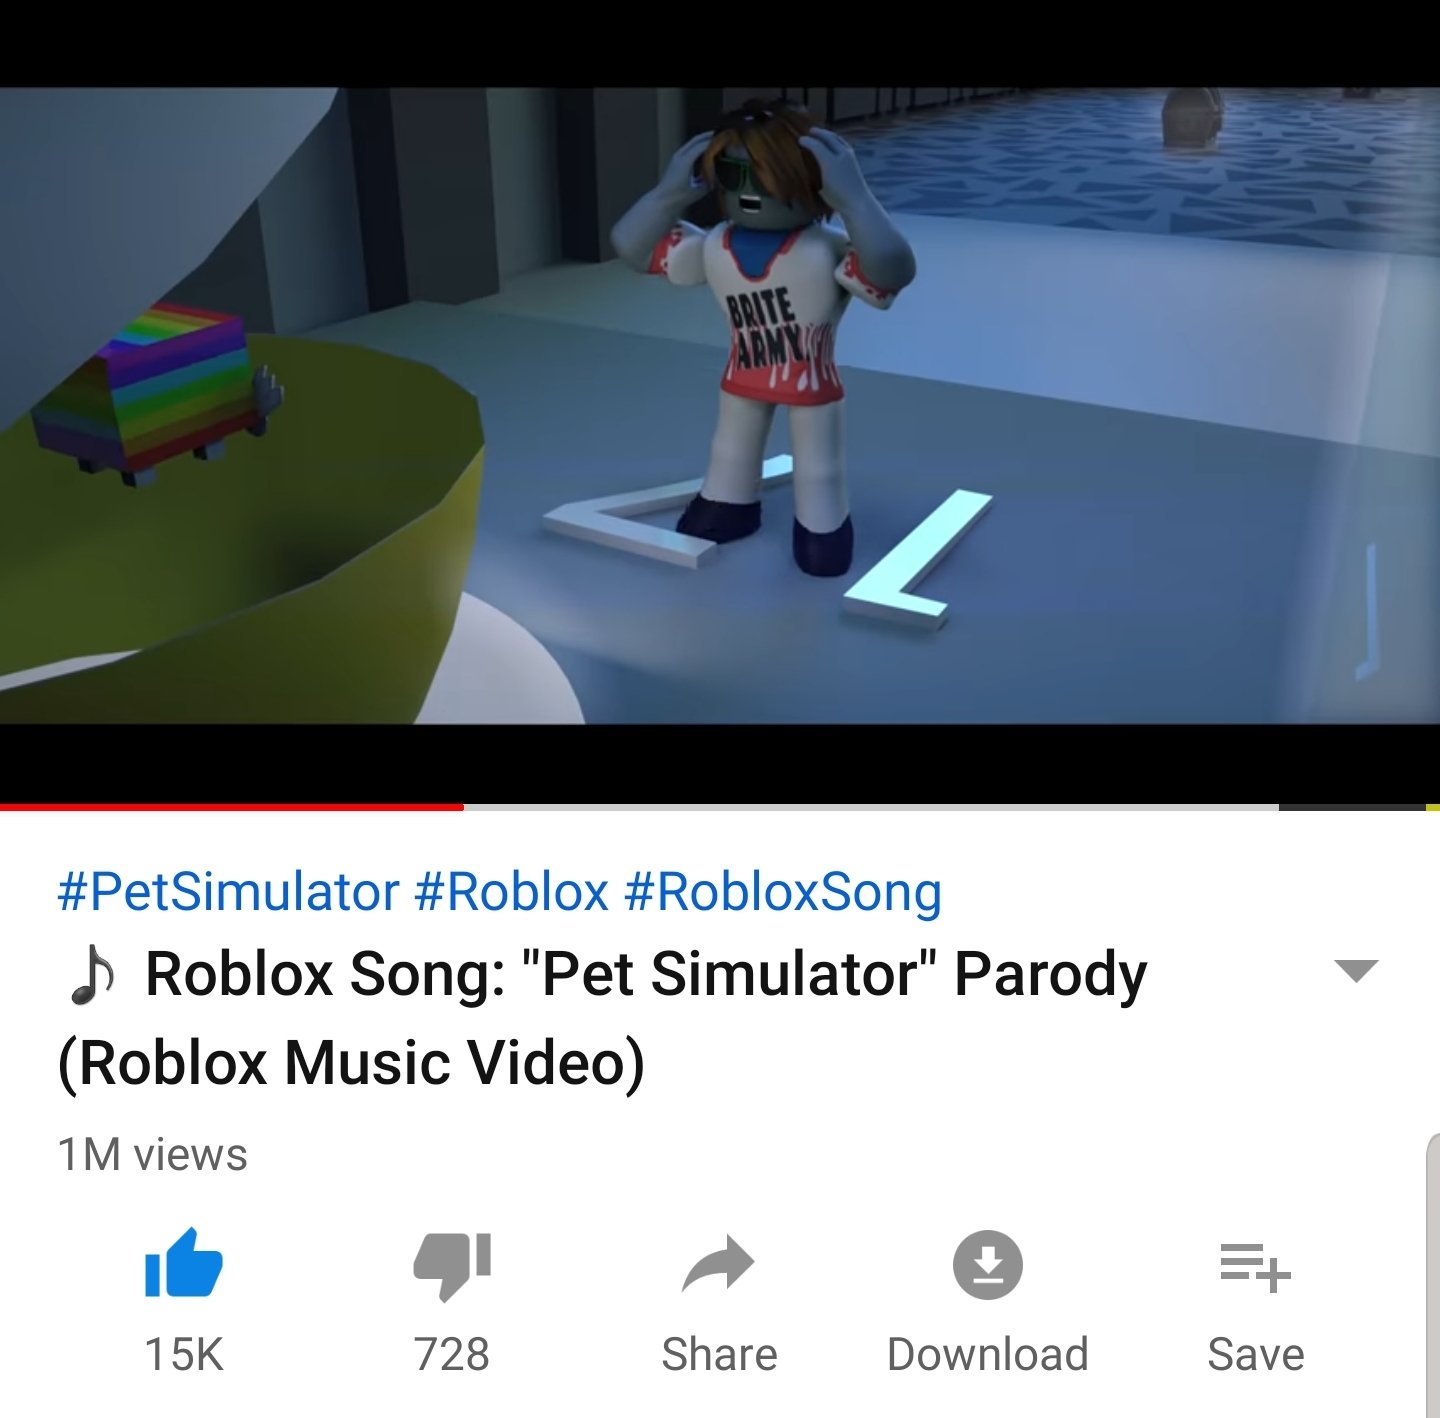 Terabrite Games On Twitter Woah Pet Simulator Is Officially Our Second Roblox Video To Hit 1 Million Views And We Passed 700k Subs In One Day You Brites Brighten Our Life - roblox song pet simulator parody roblox music video